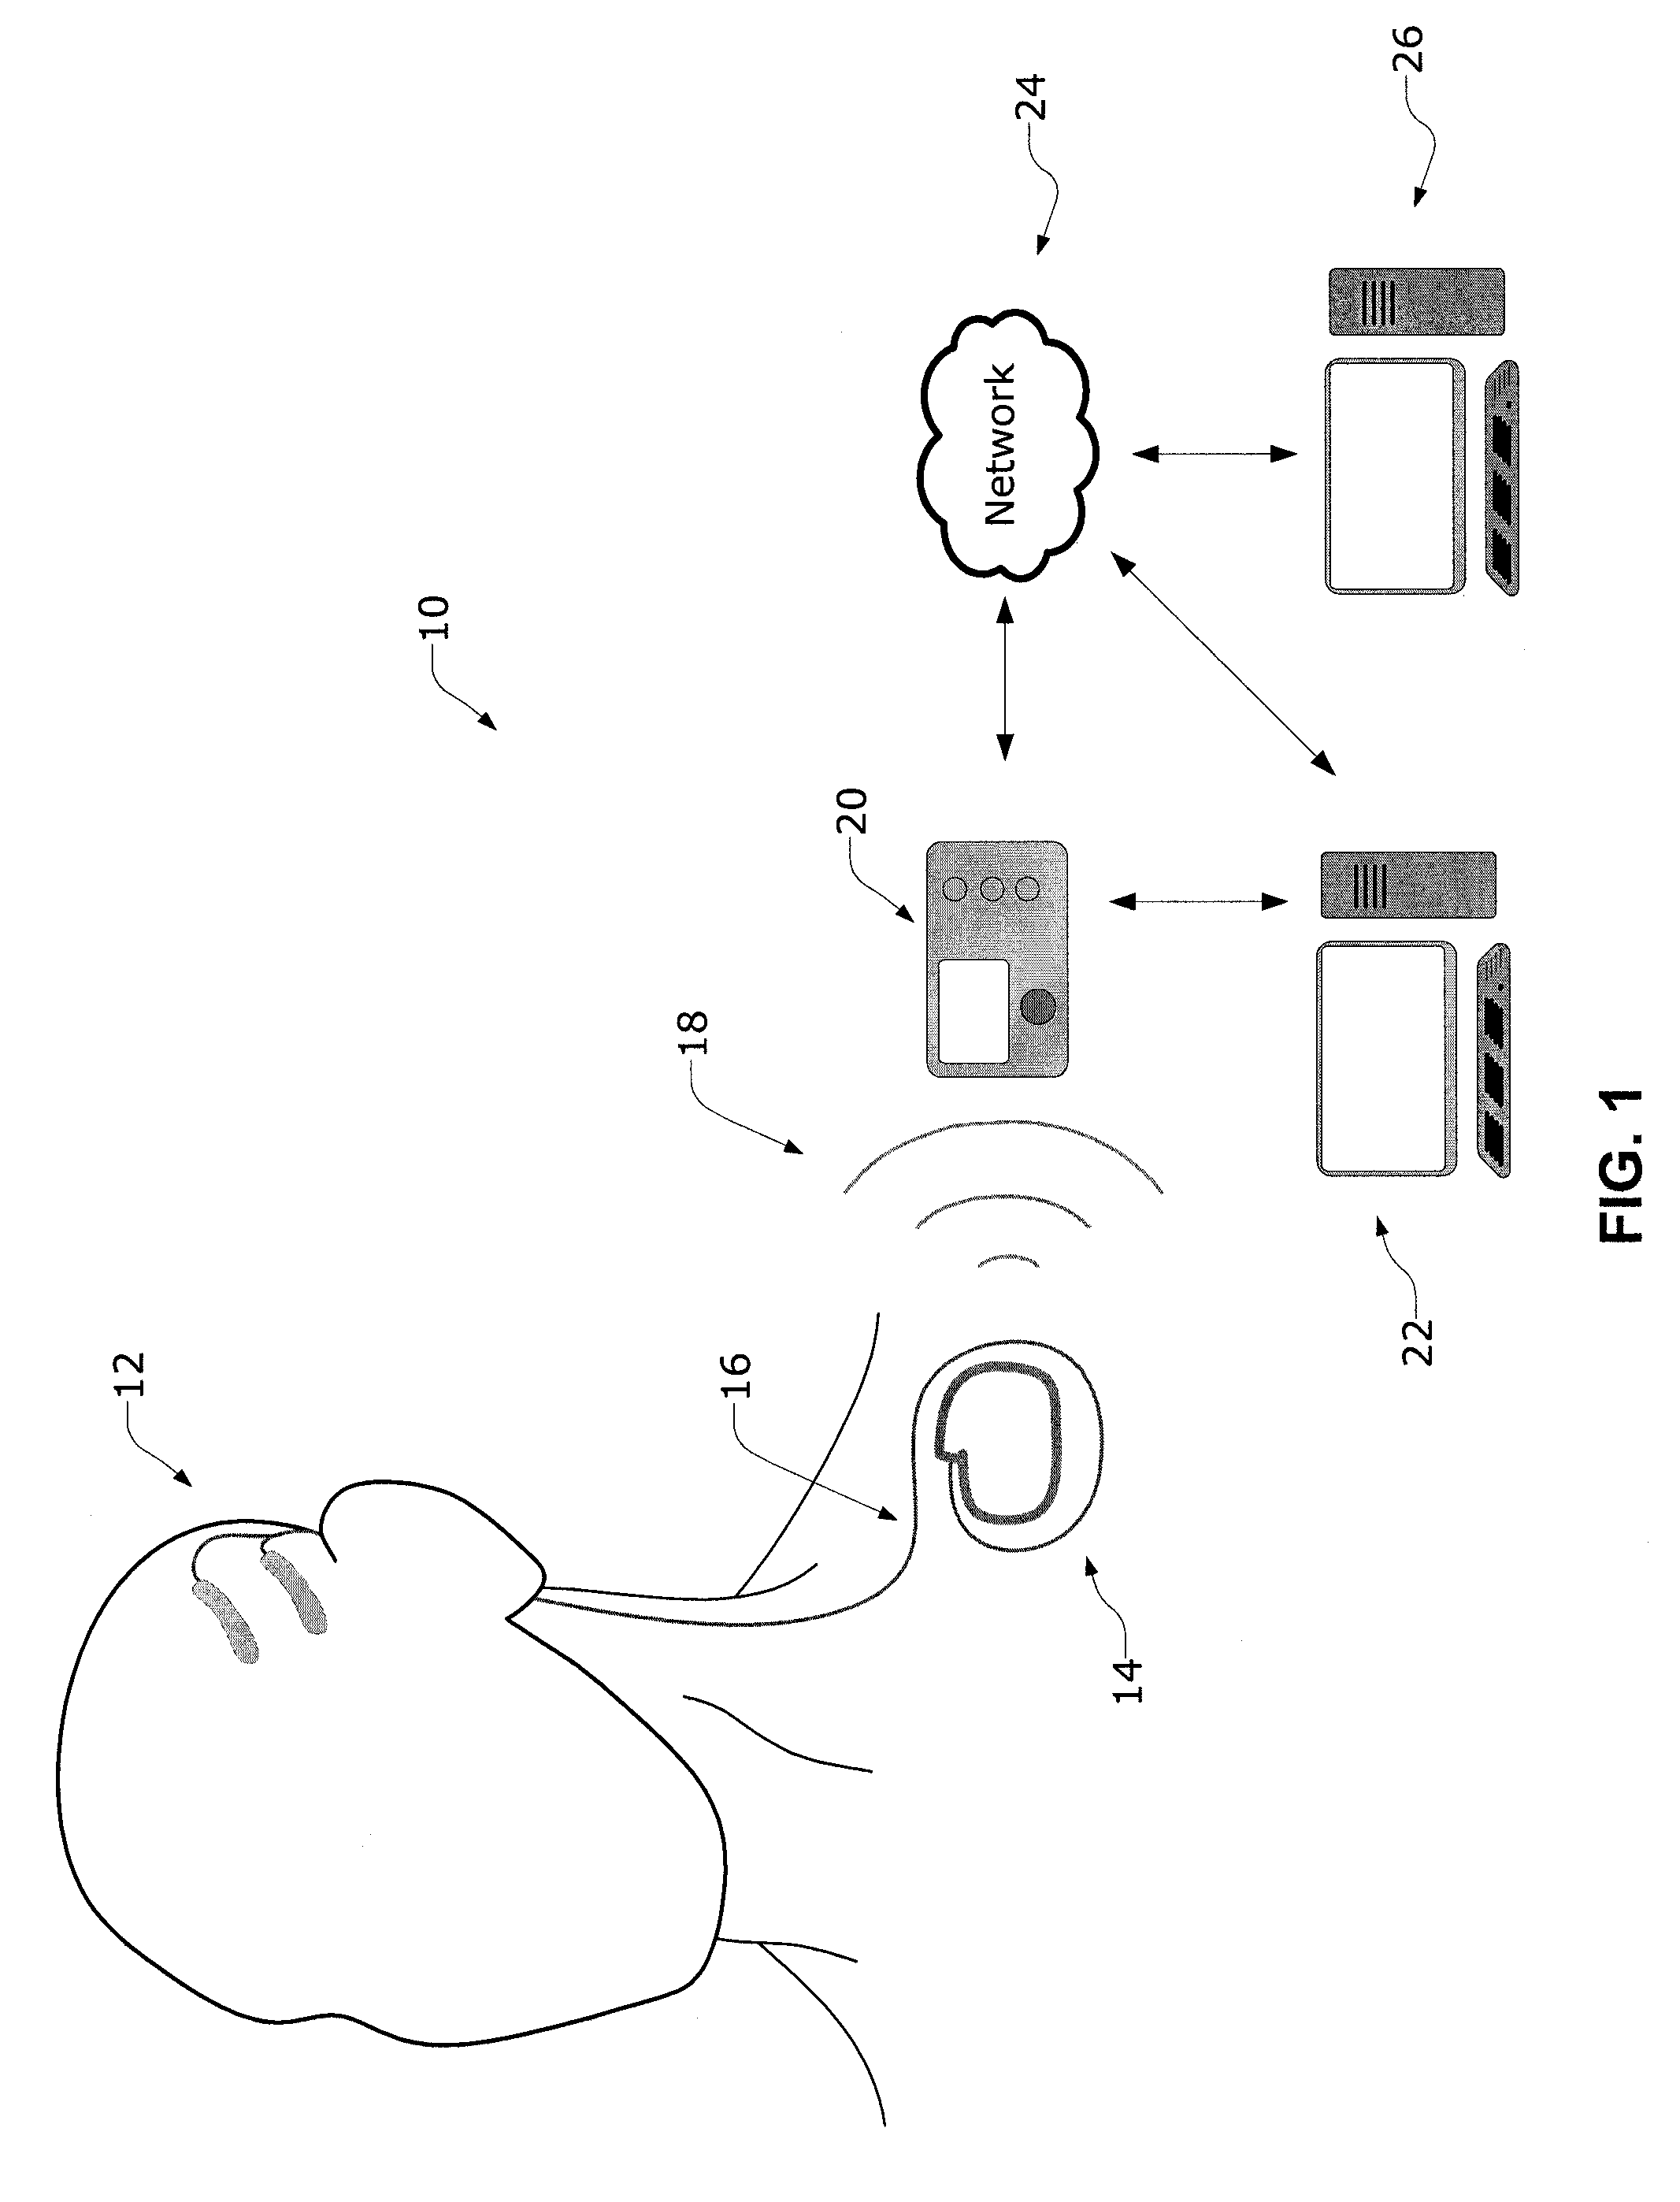 Methods and Systems for Measuring a Subject's Susceptibility to a Seizure